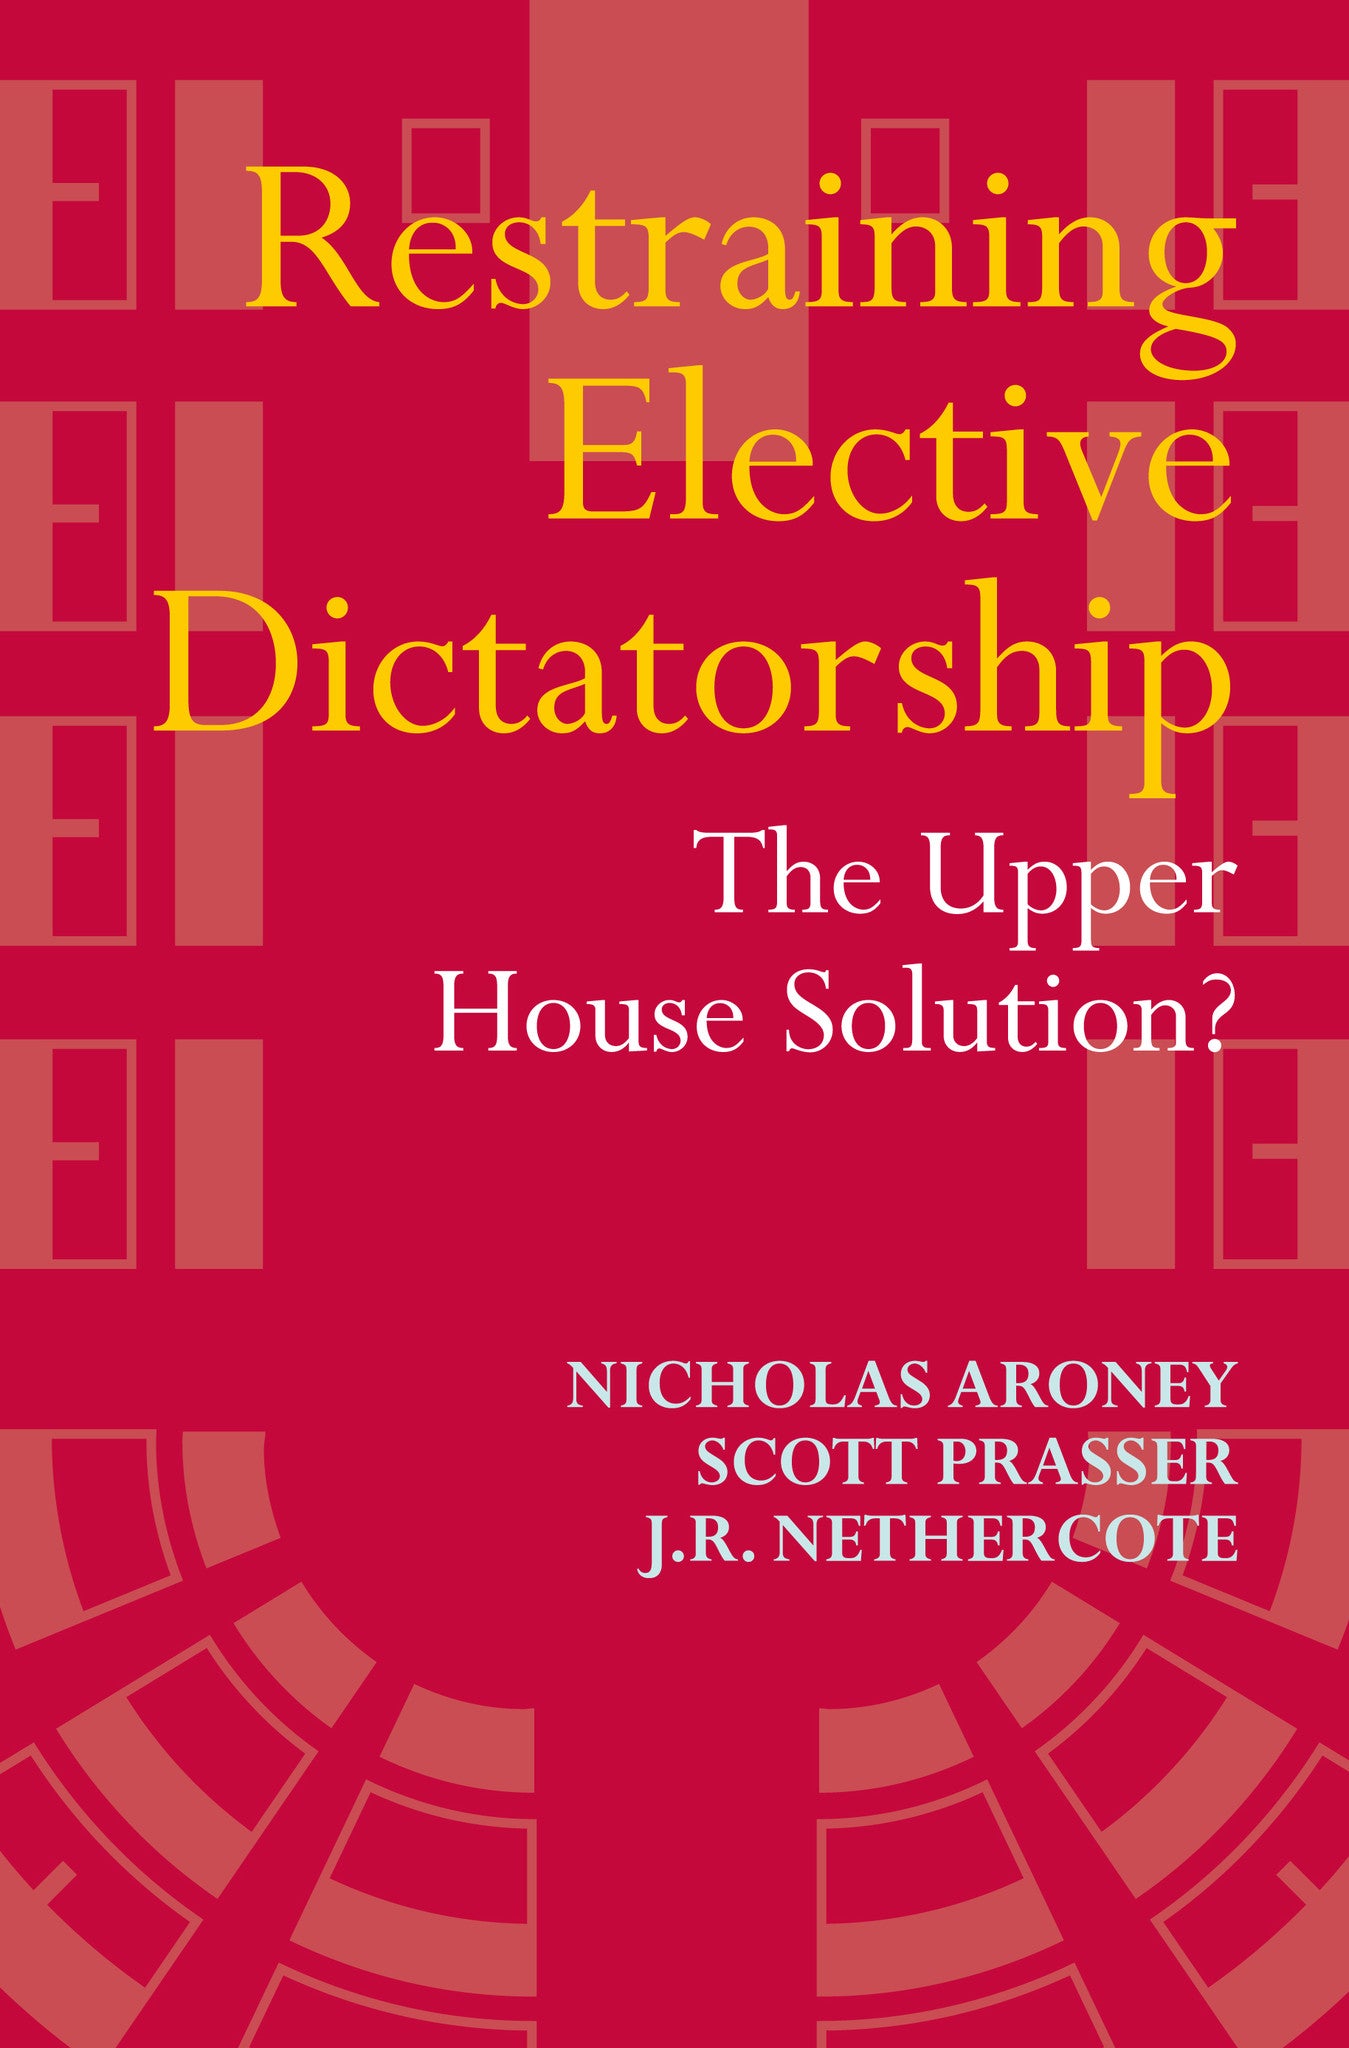 Restraining Elective Dictatorship: The Upper House Solution?